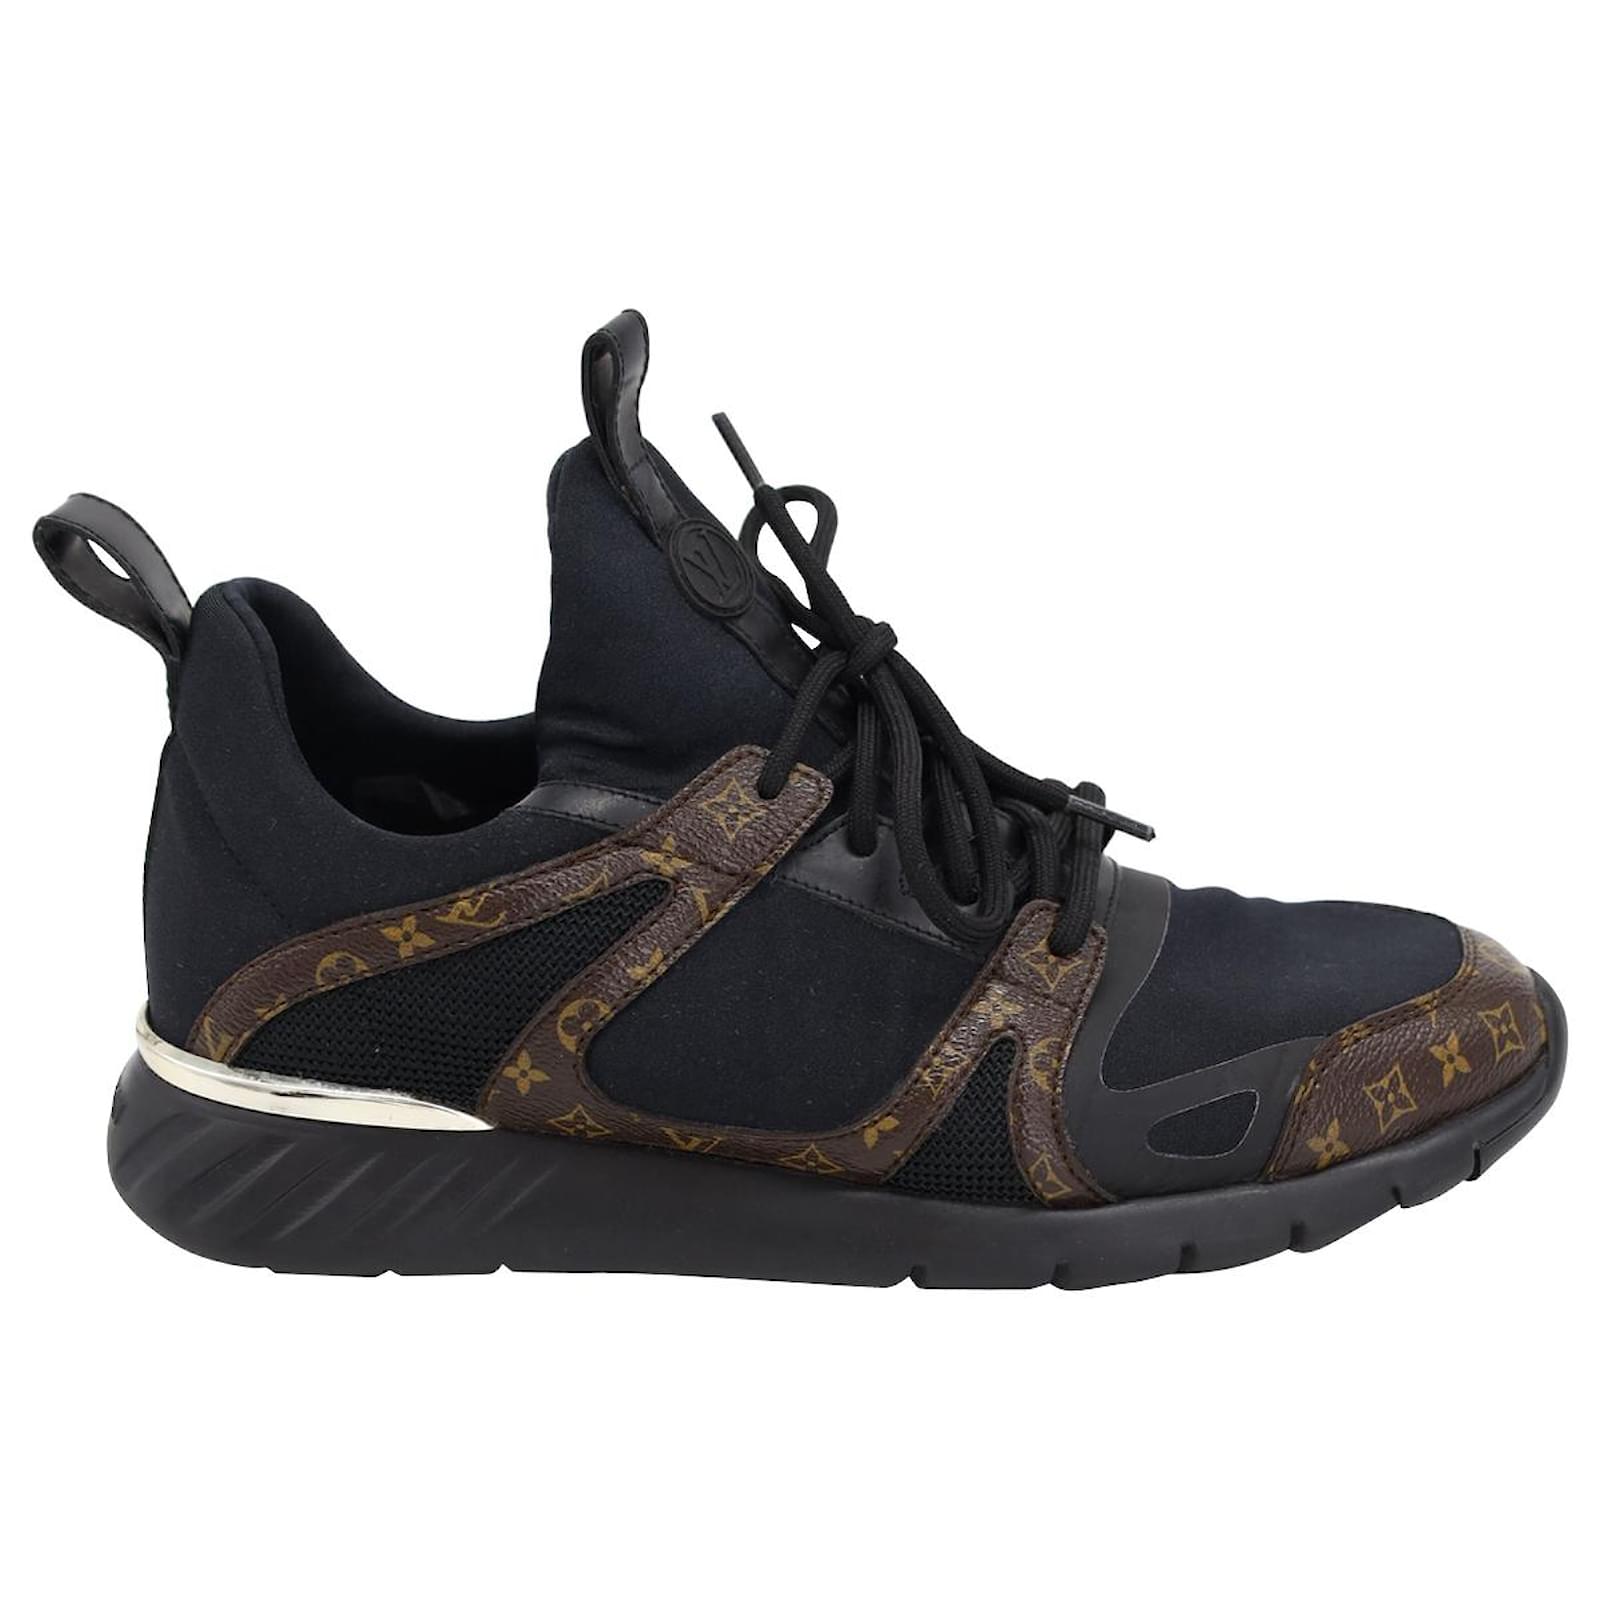 Louis Vuitton Louis Vuitton Sneakers In Black Mesh And Monogram Leather  Athletic Shoes Sneakers on SALE